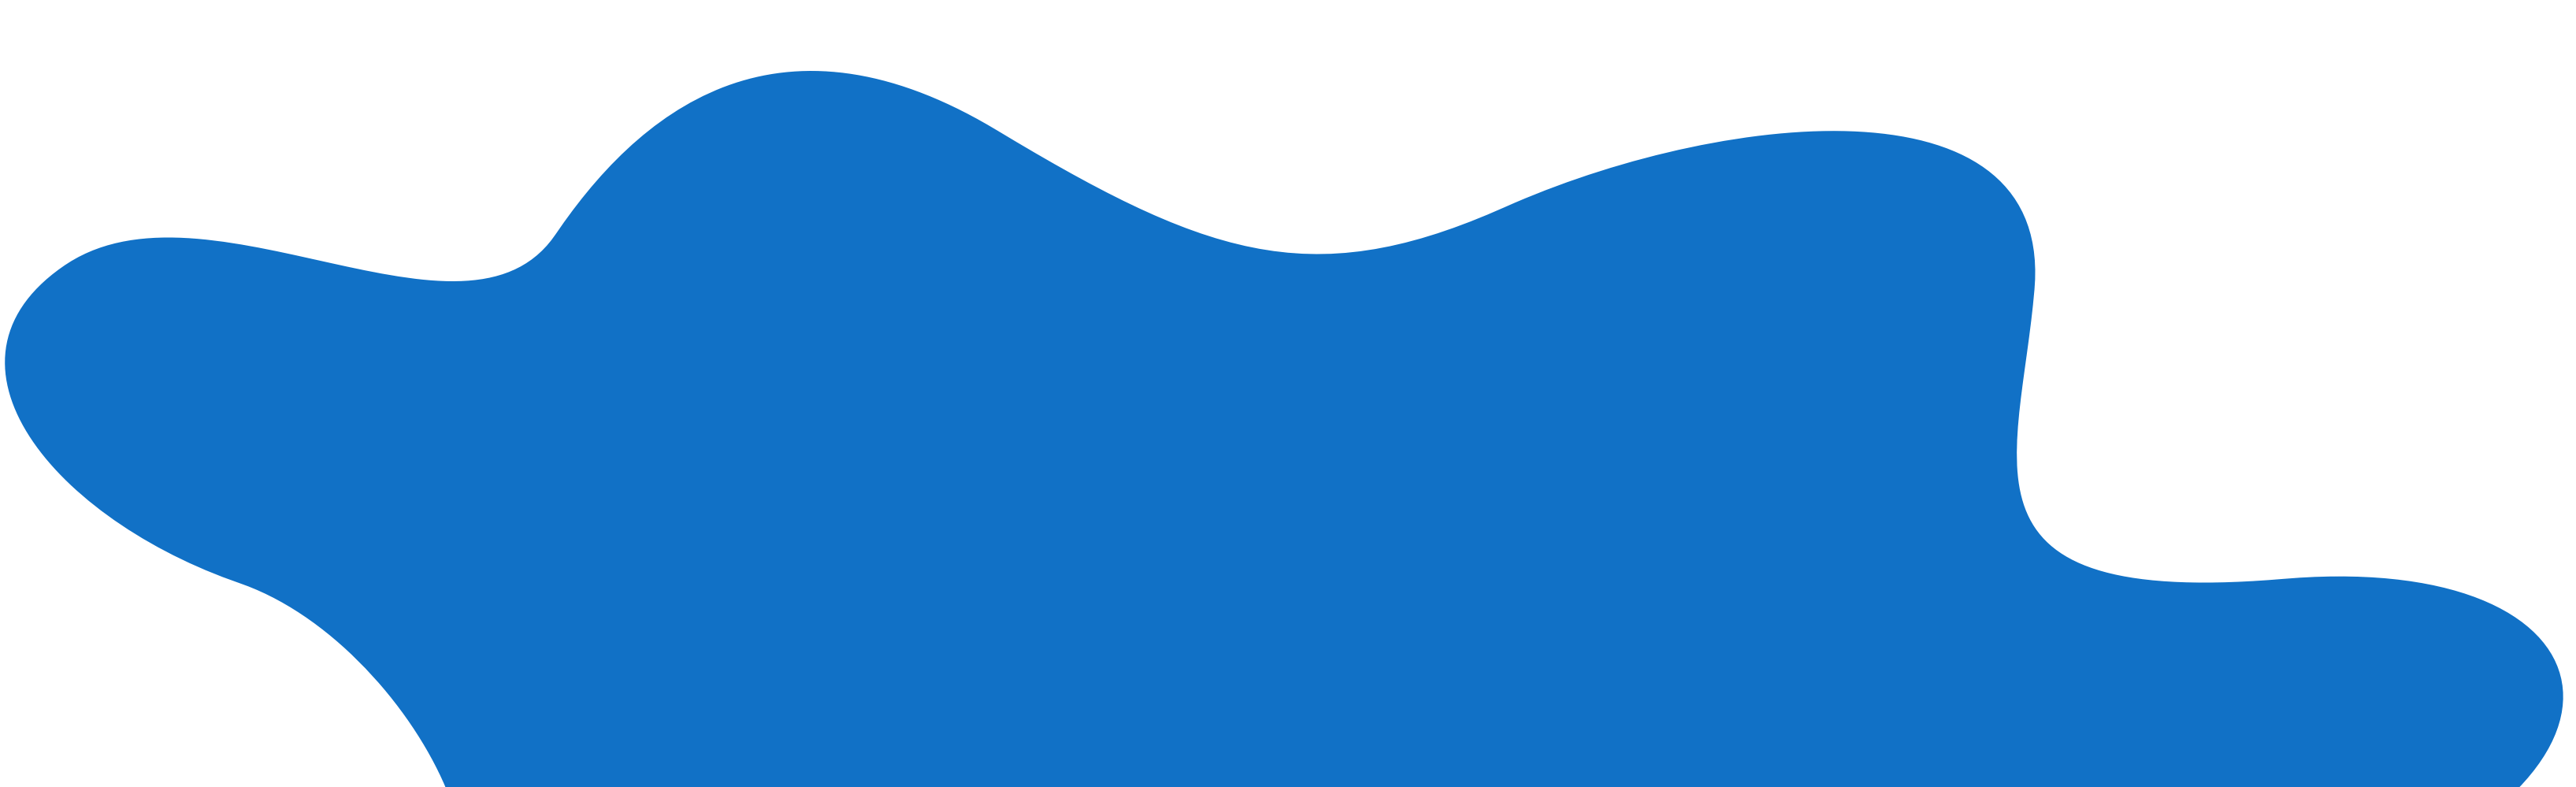 A large blue blob on a white background.